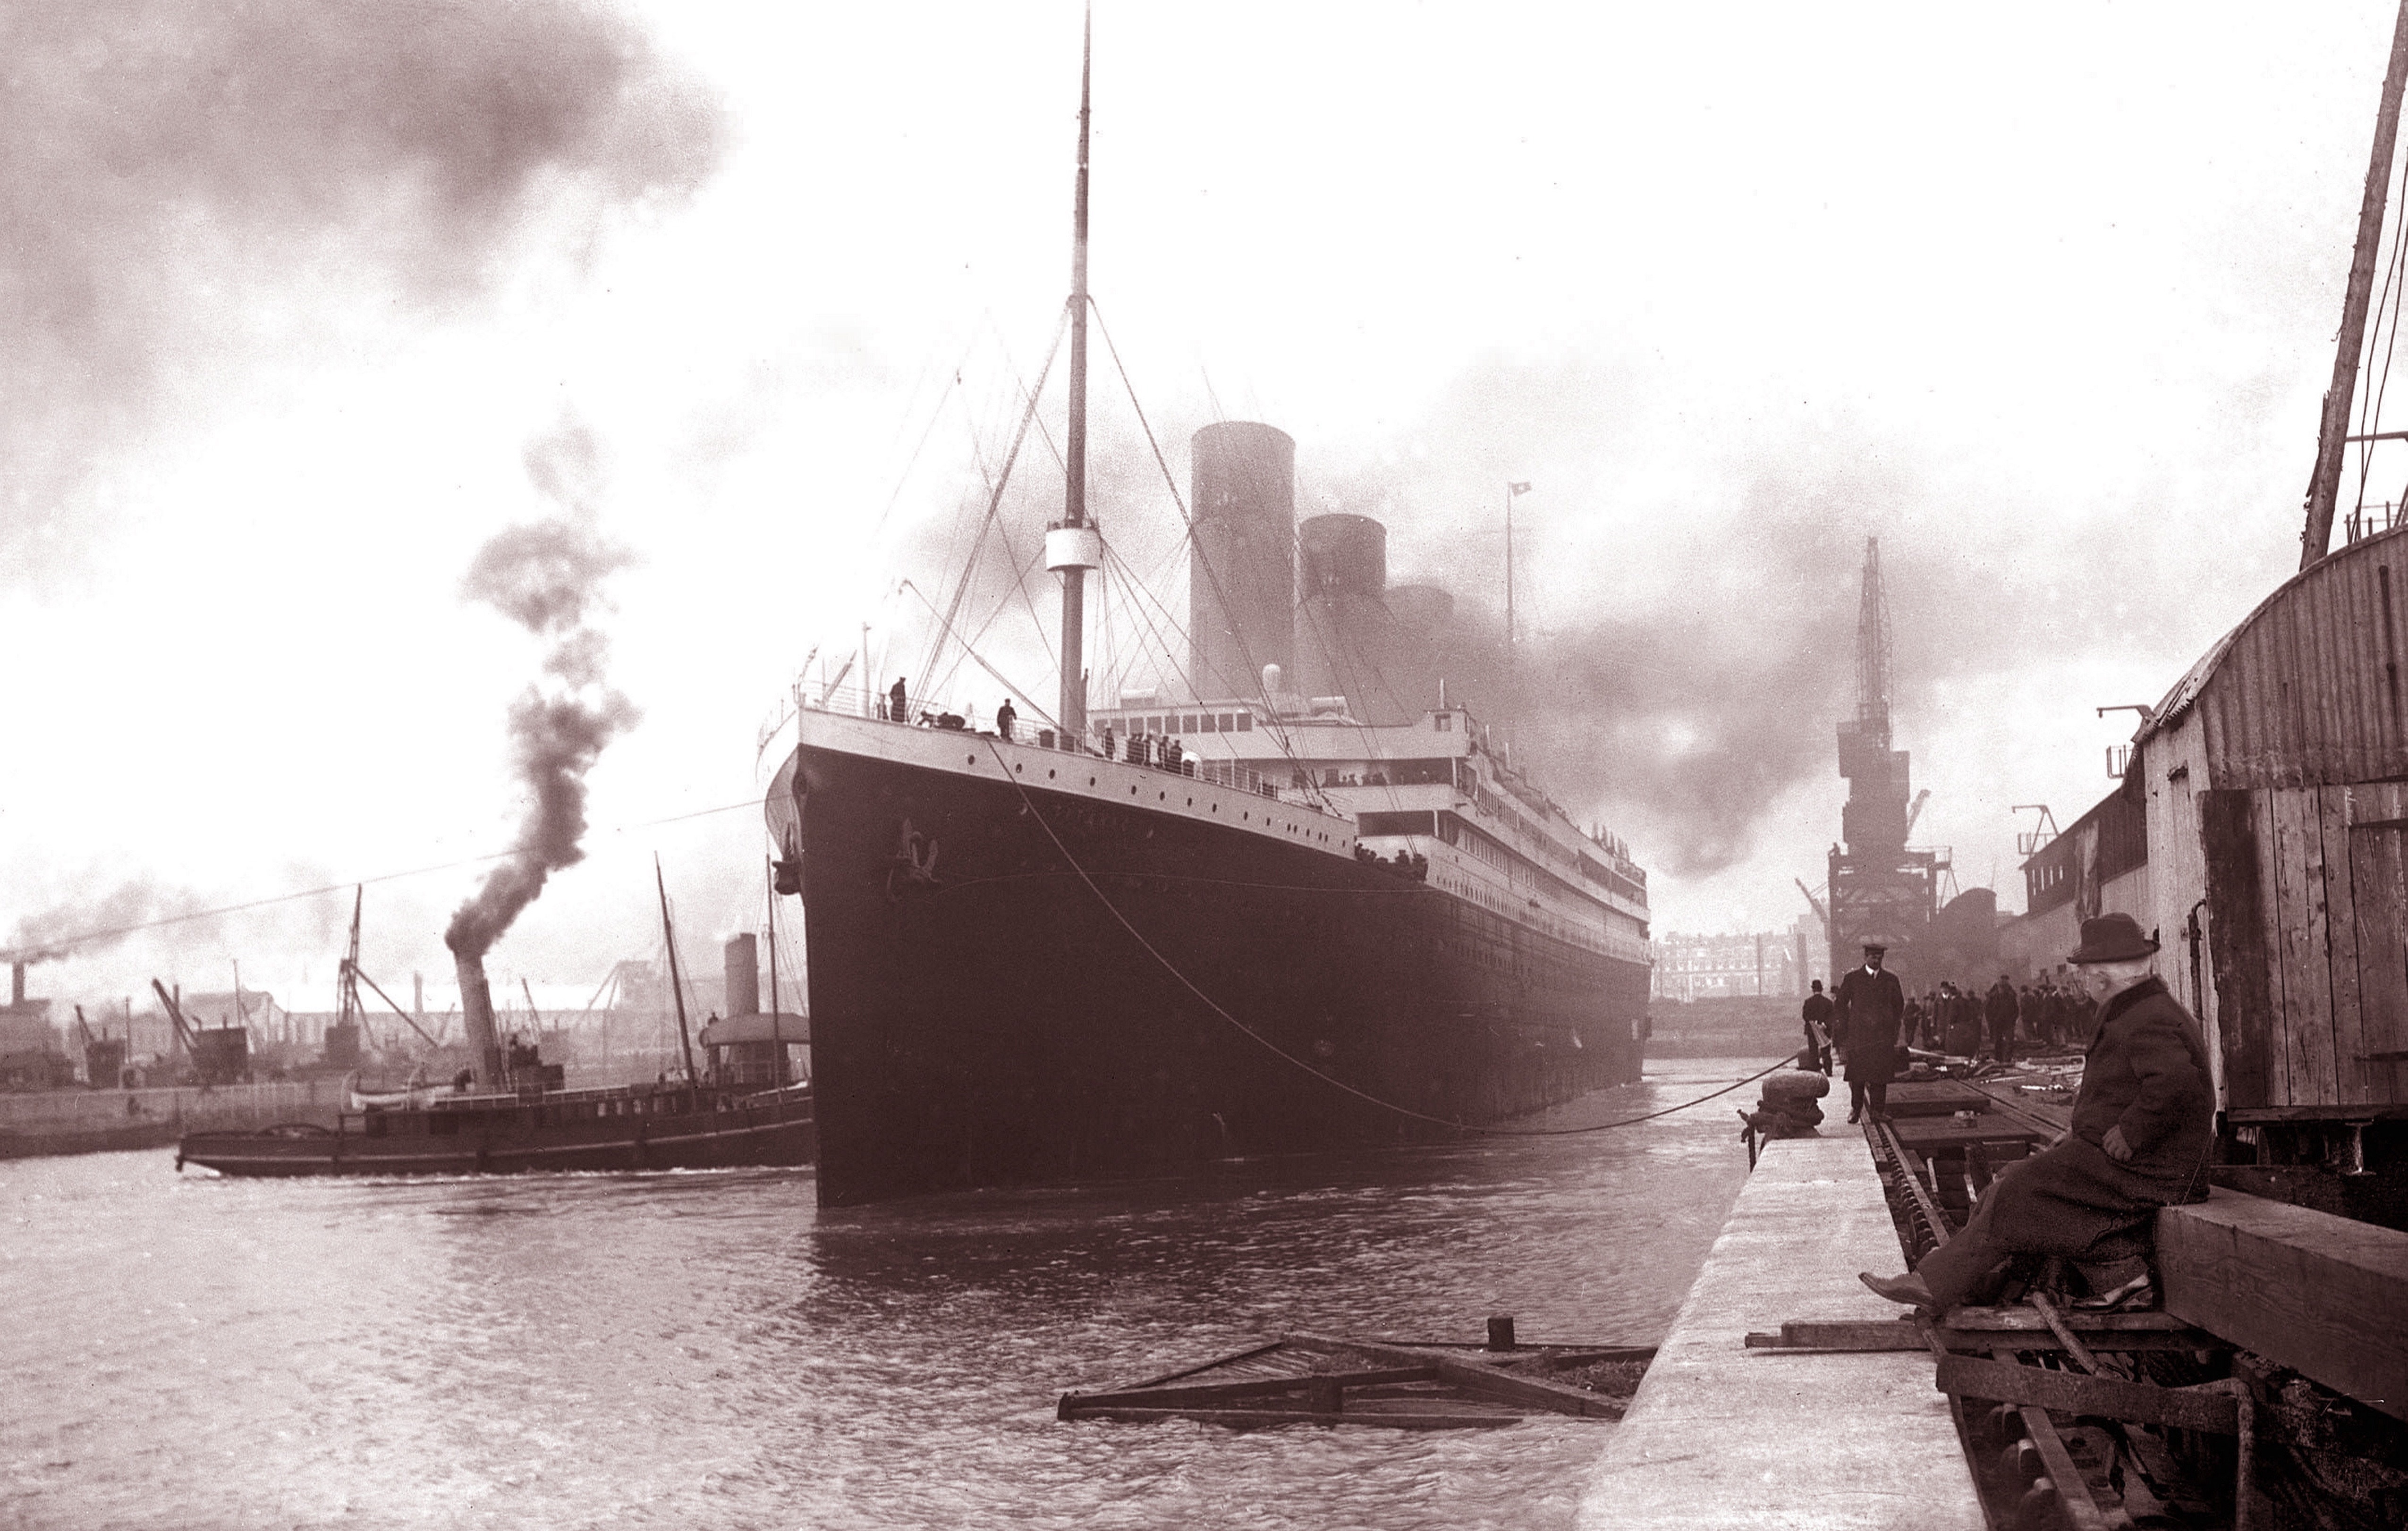 Exclusive: How US firm plans to salvage Titanic's 'voice' in controversial  expedition